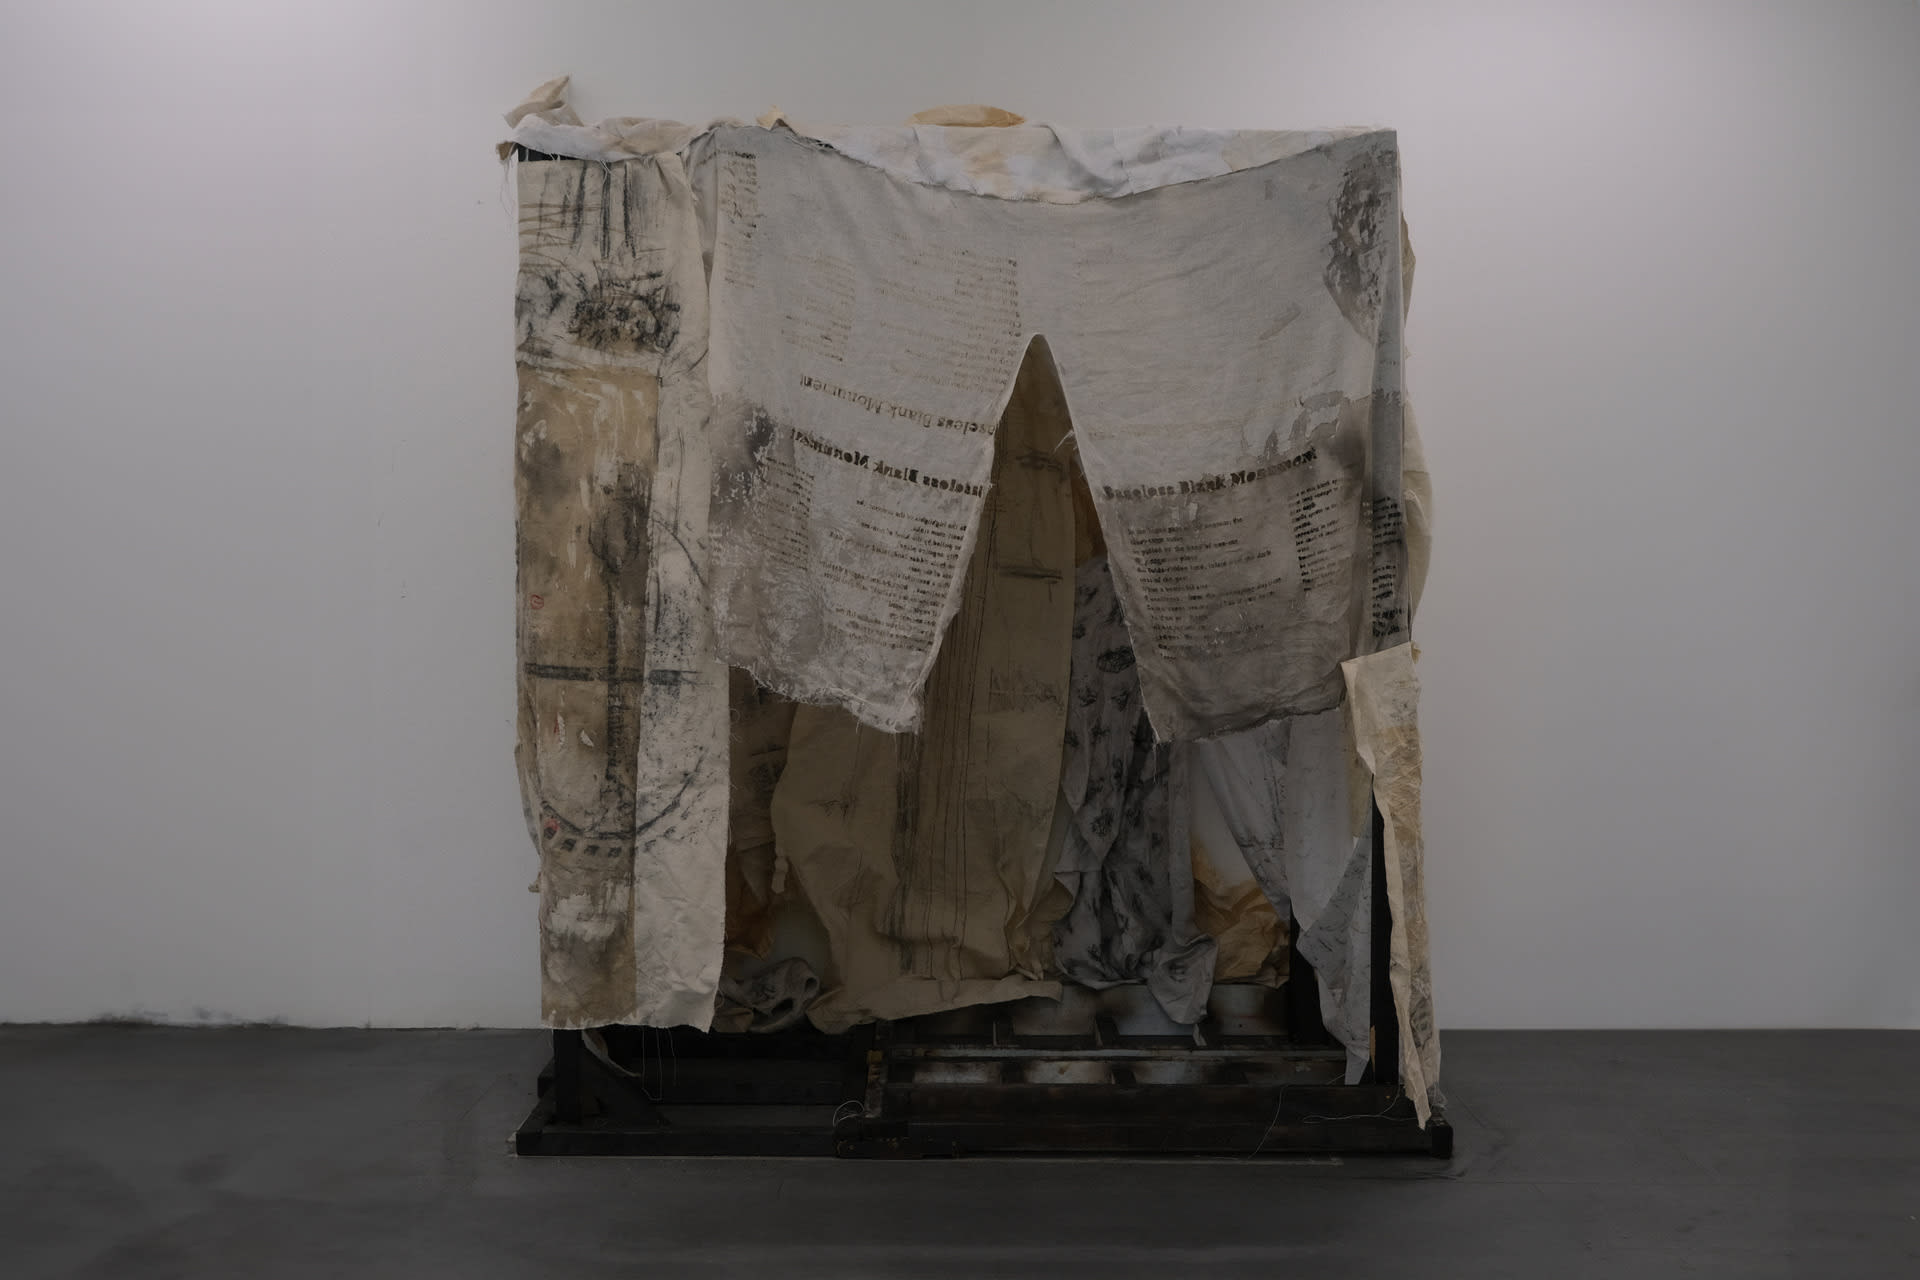 Rubbed fabrics are hung on fire-burned wooden frames, like a kind of dilapidated monument